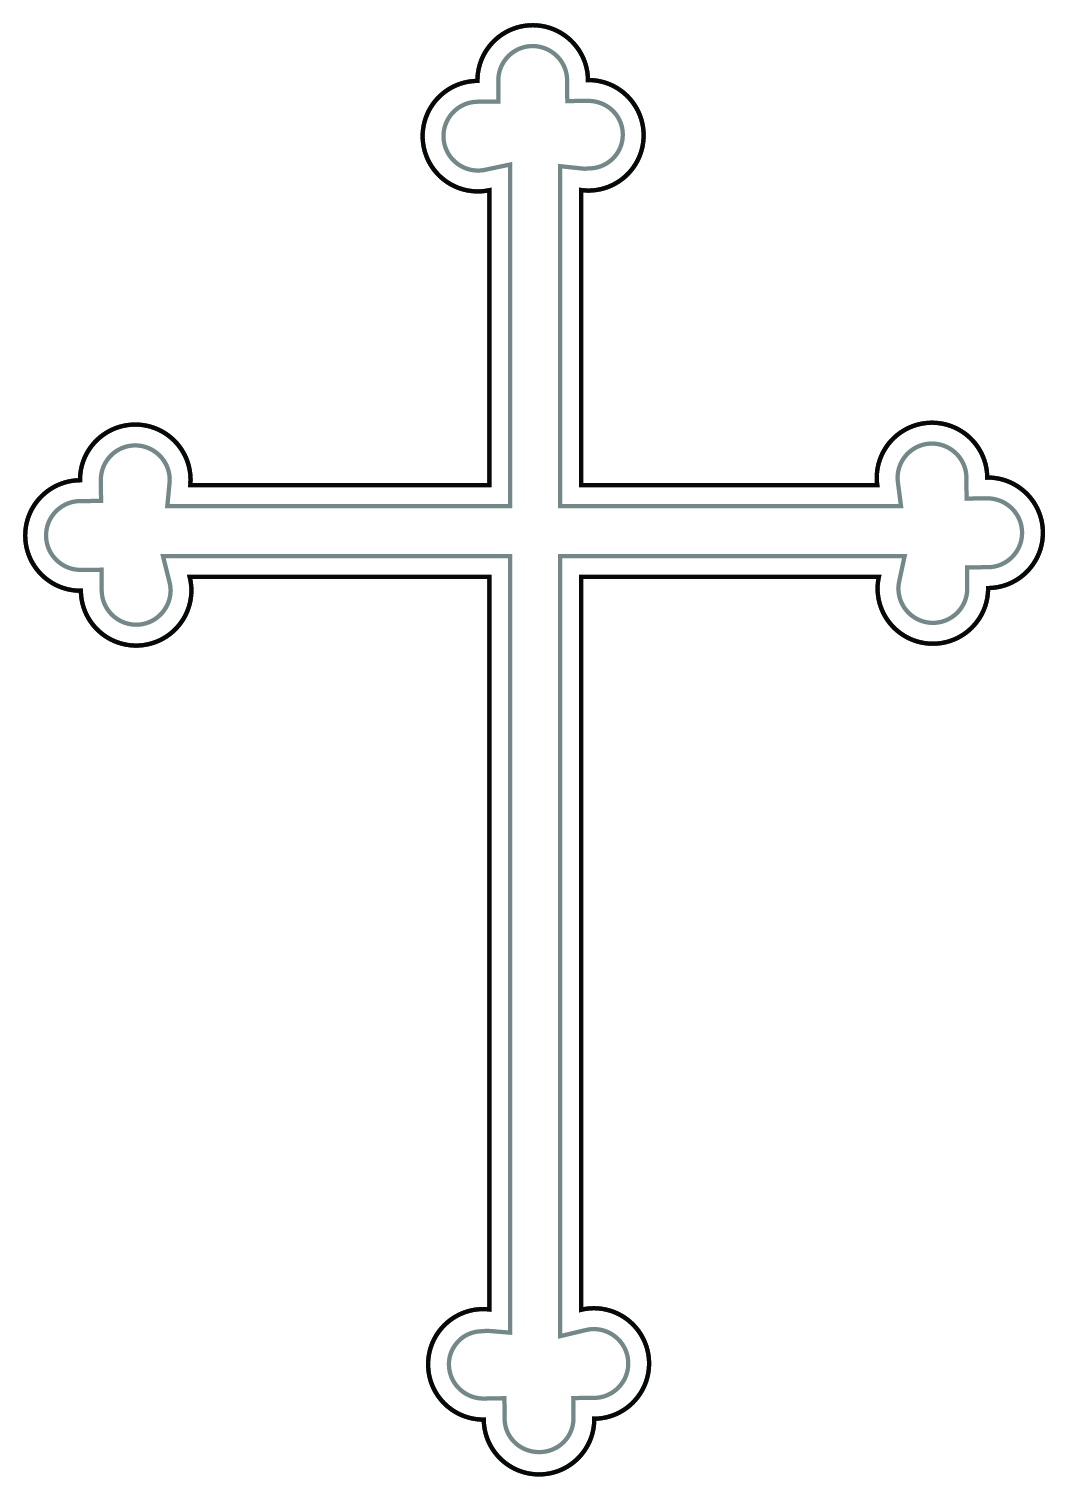 Baptism cross clipart black and white 